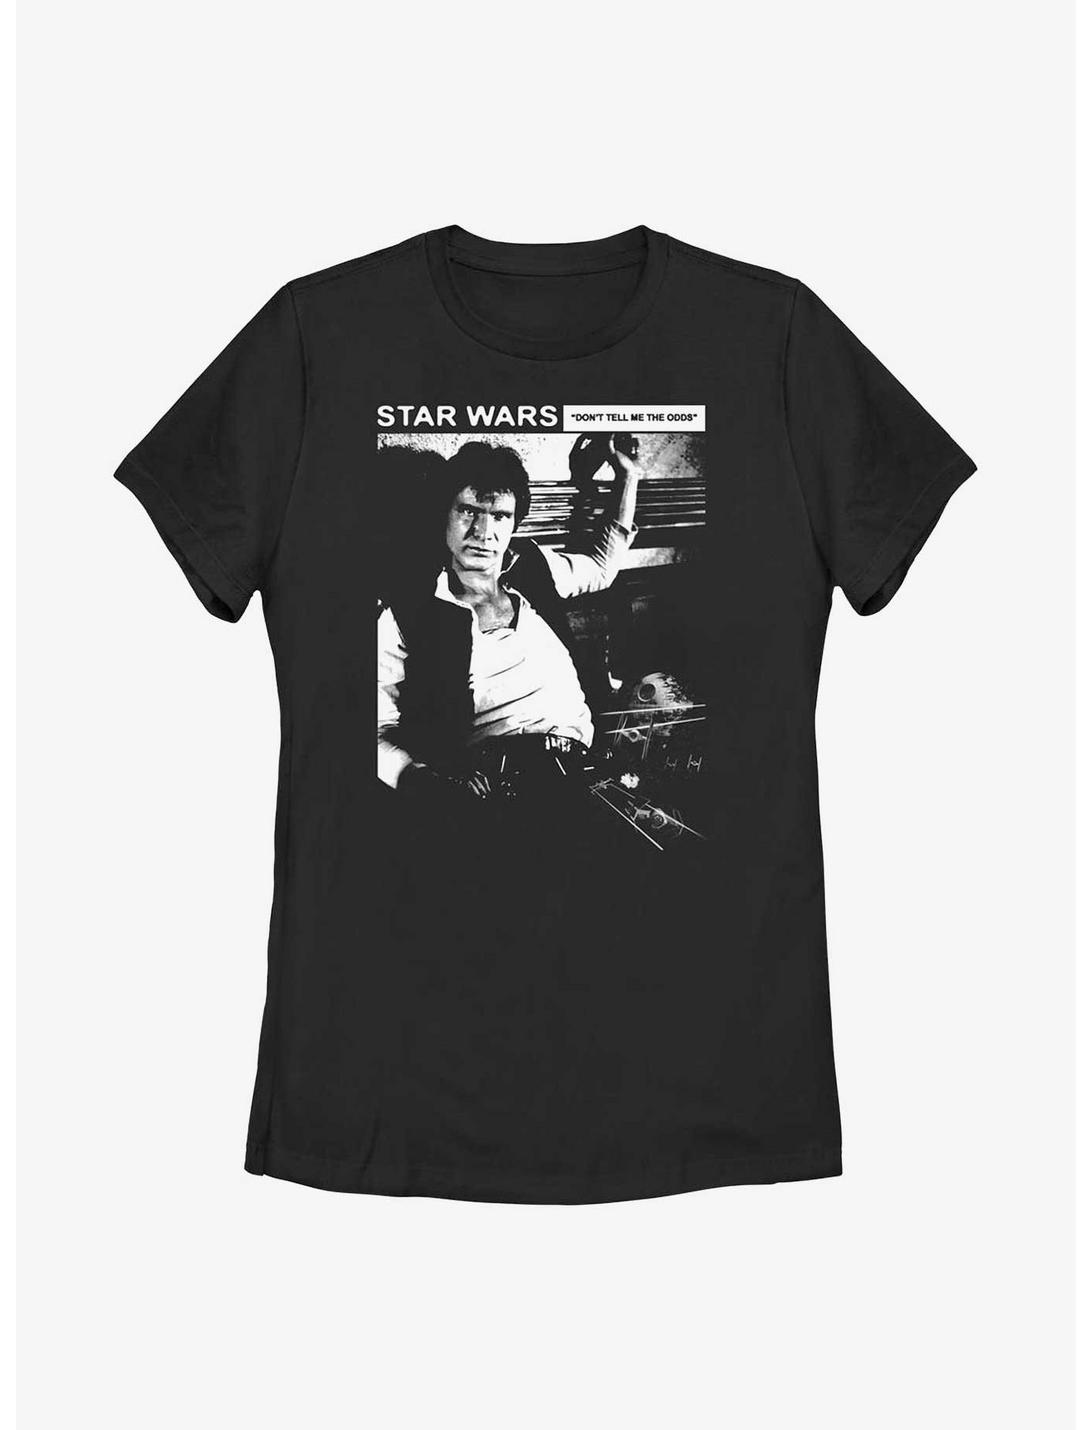 Star Wars Don't Tell Me The Odds Han Solo Womens T-Shirt, BLACK, hi-res